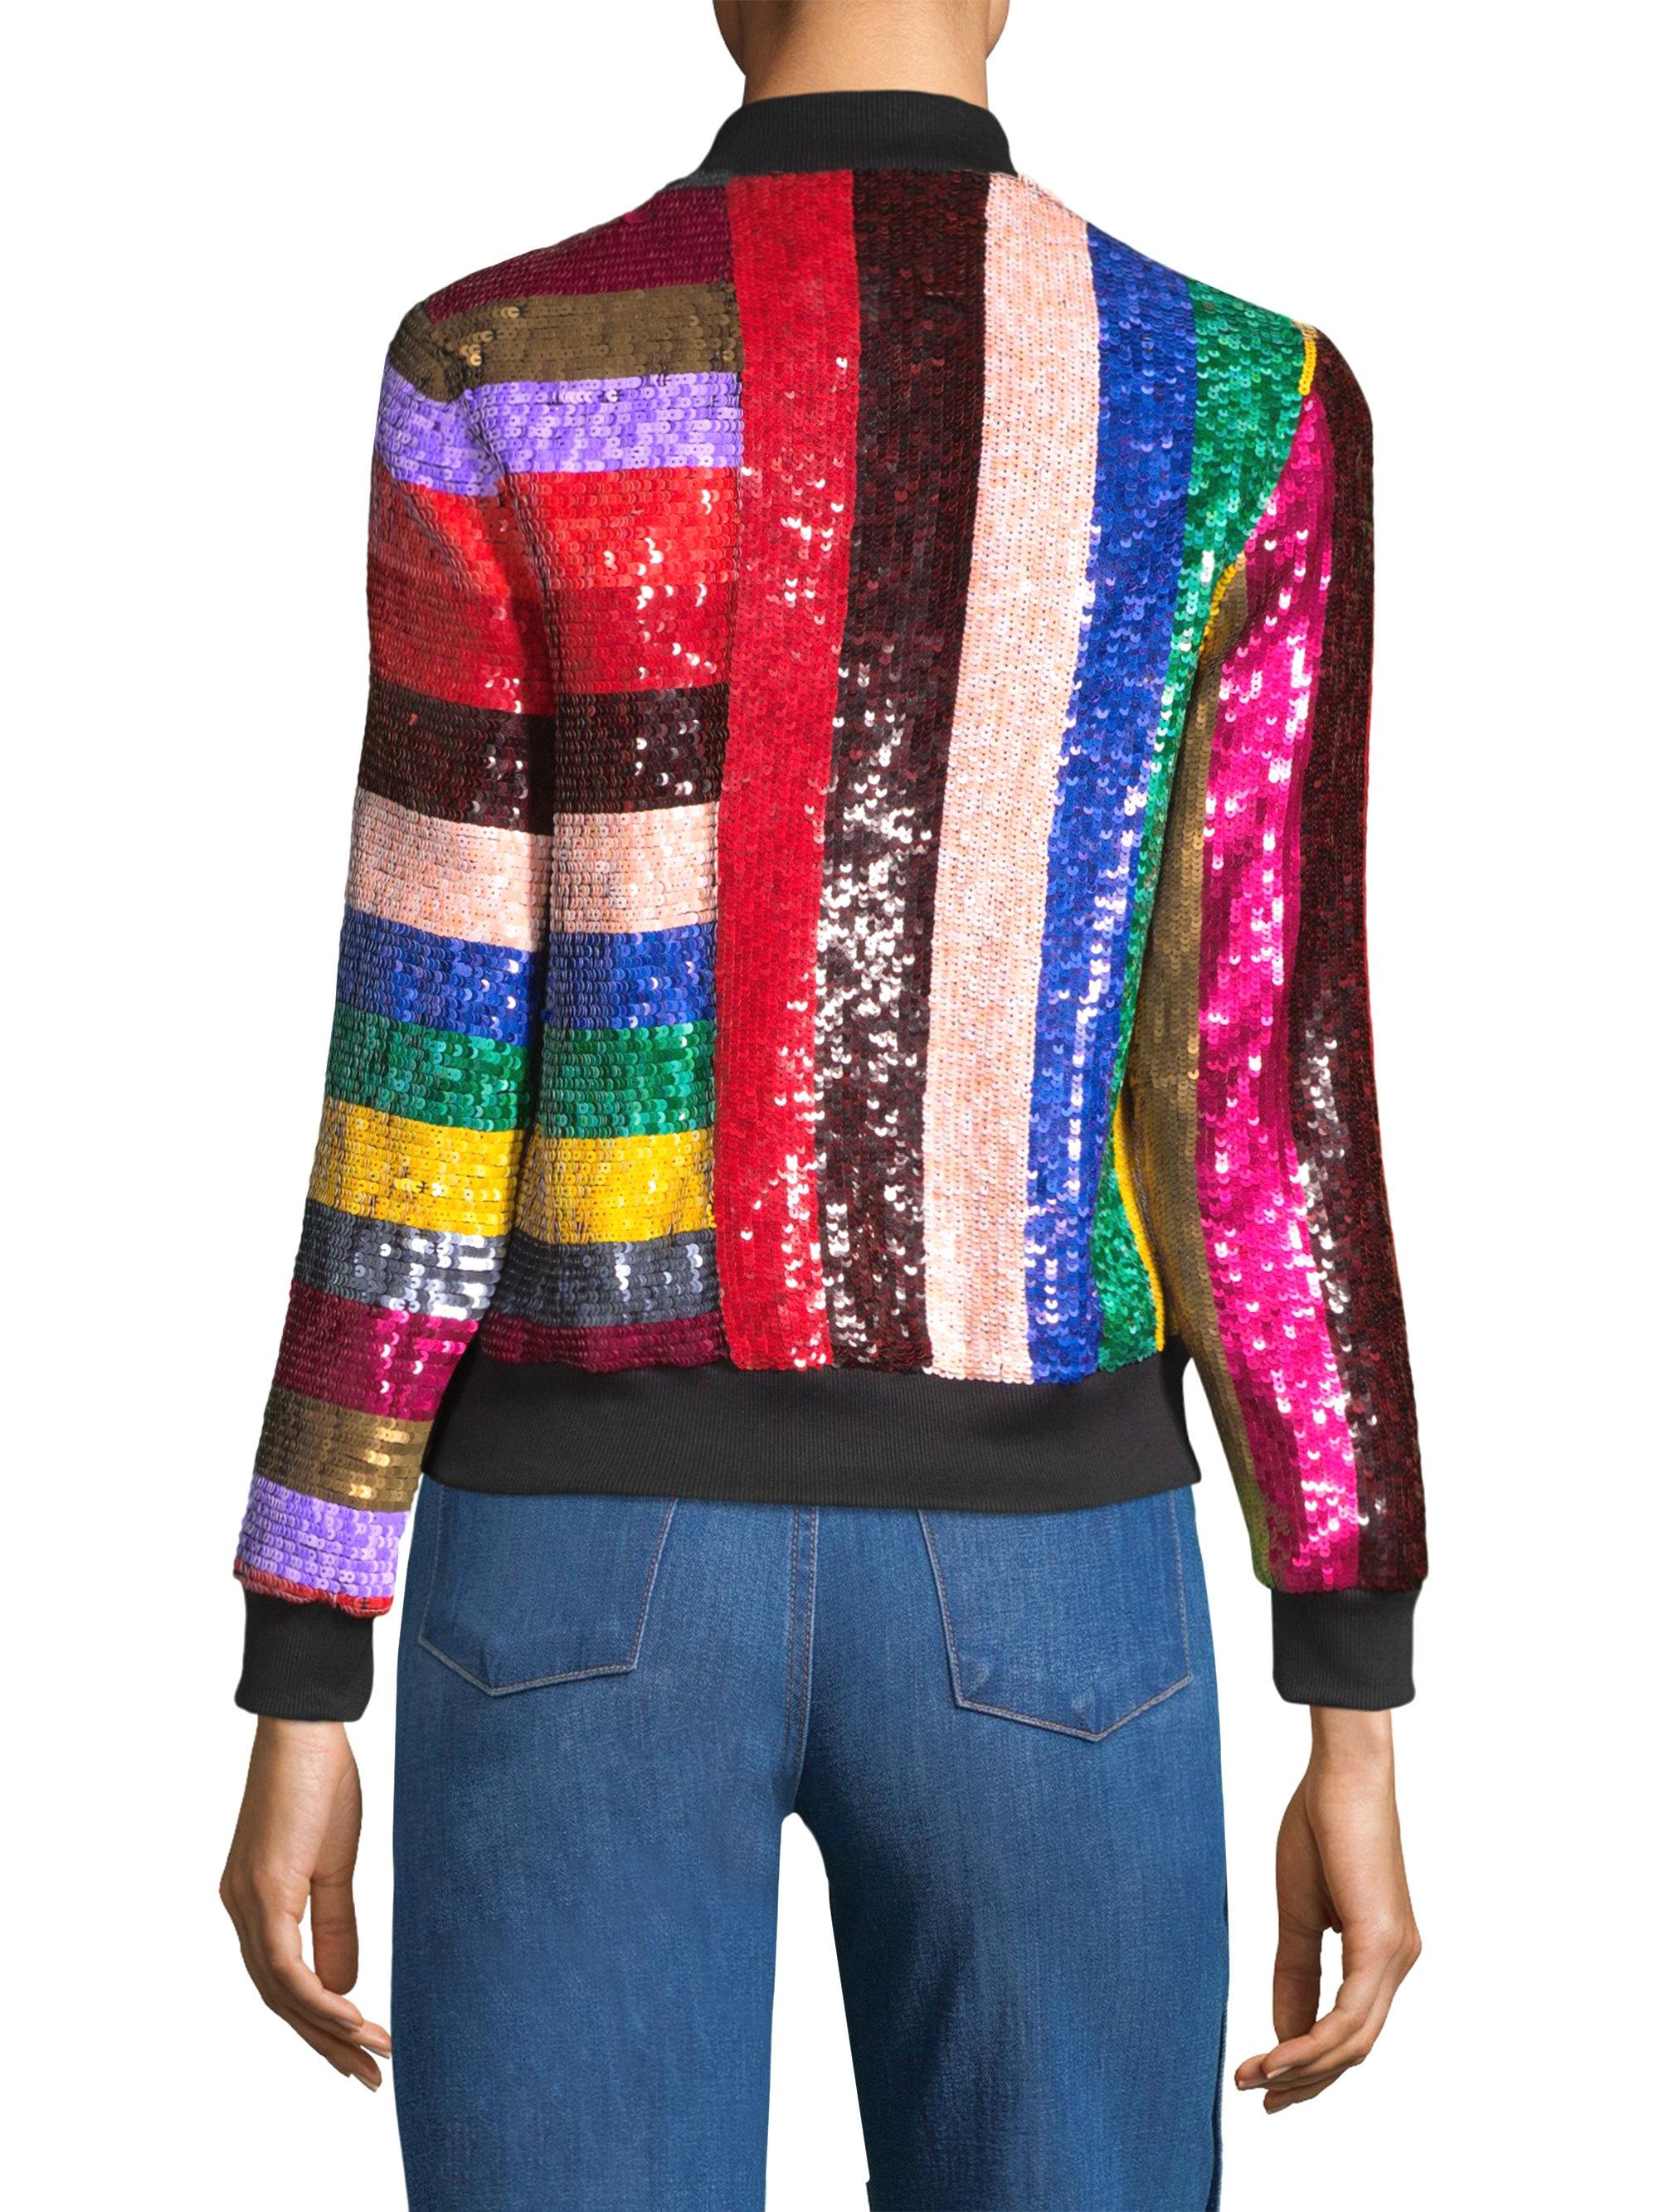 Alice + Olivia Cotton Lonnie Sequin Bomber Jacket | Lyst